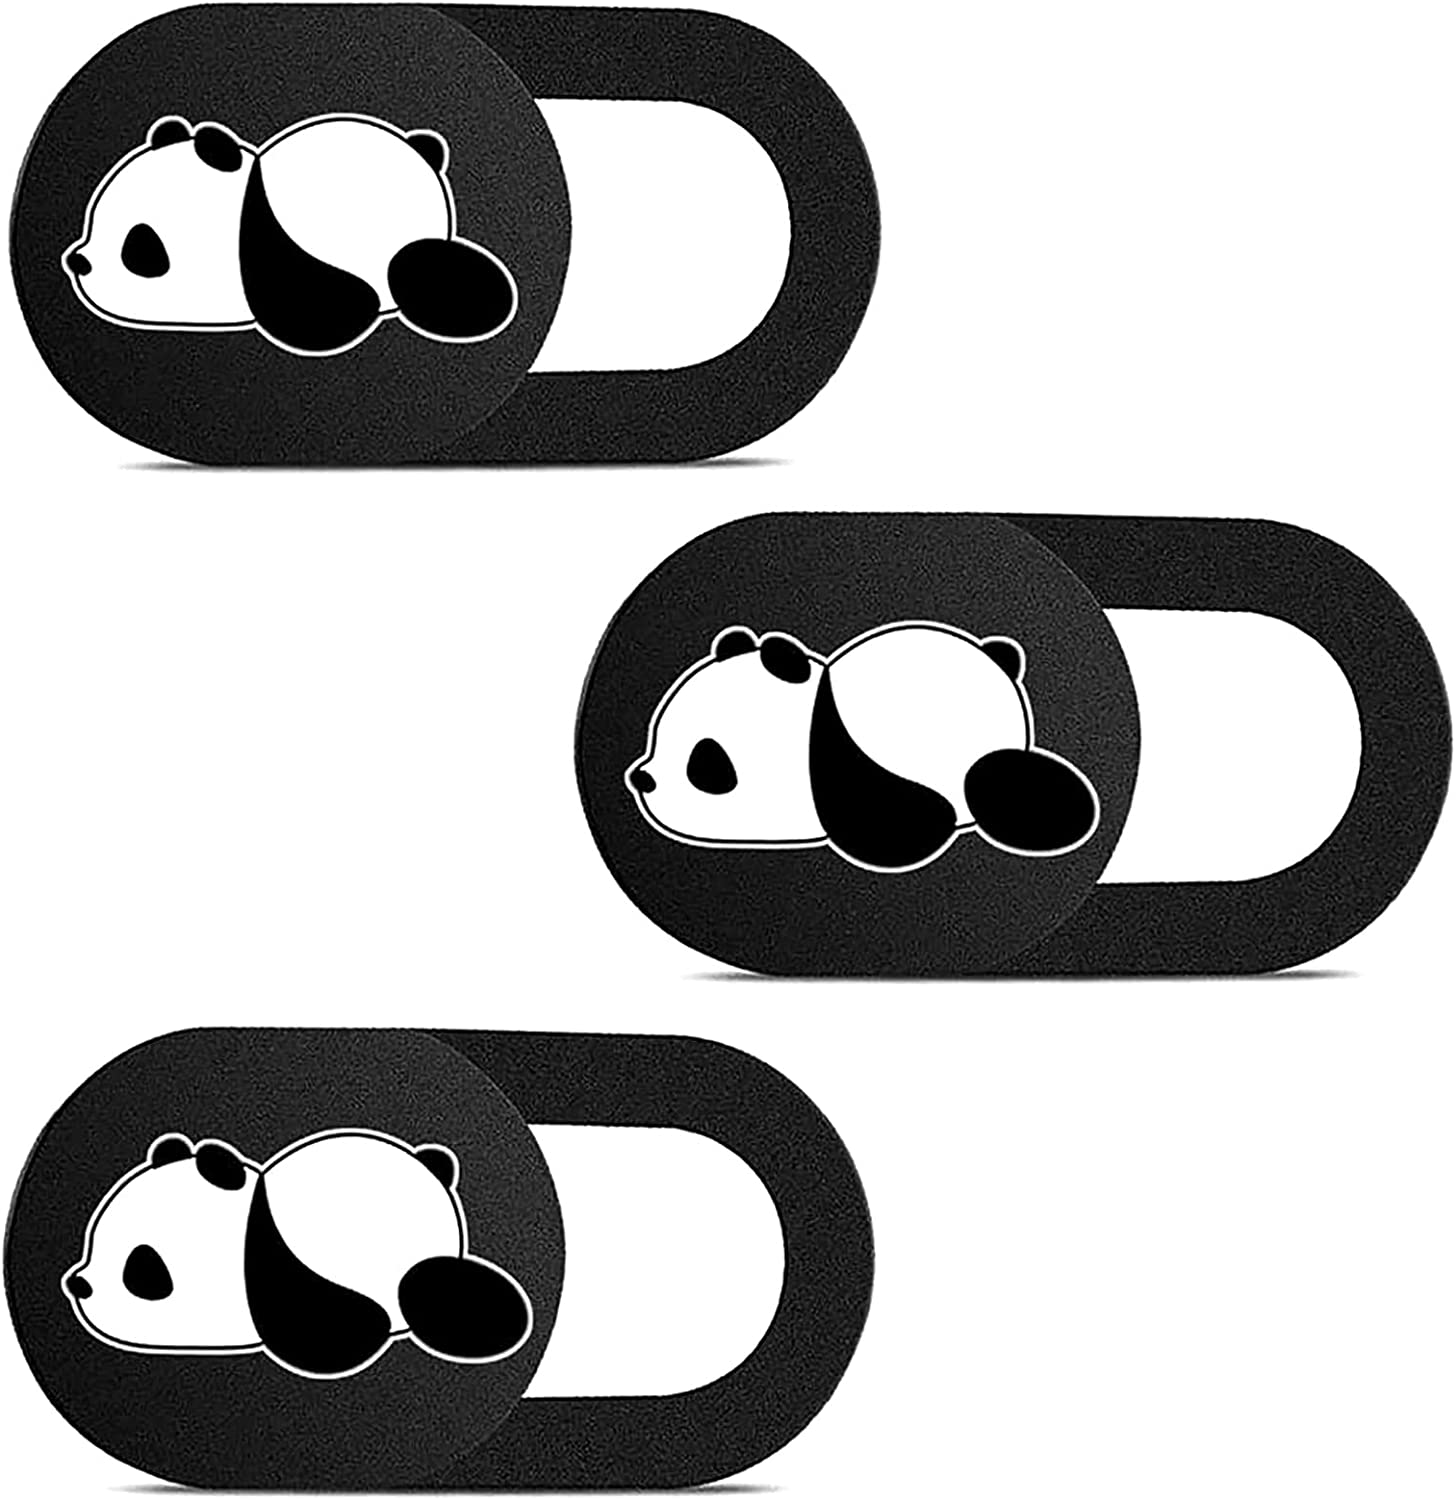 FanNicoo Panda Adhesive Webcam Privacy Covers, 3-Pack